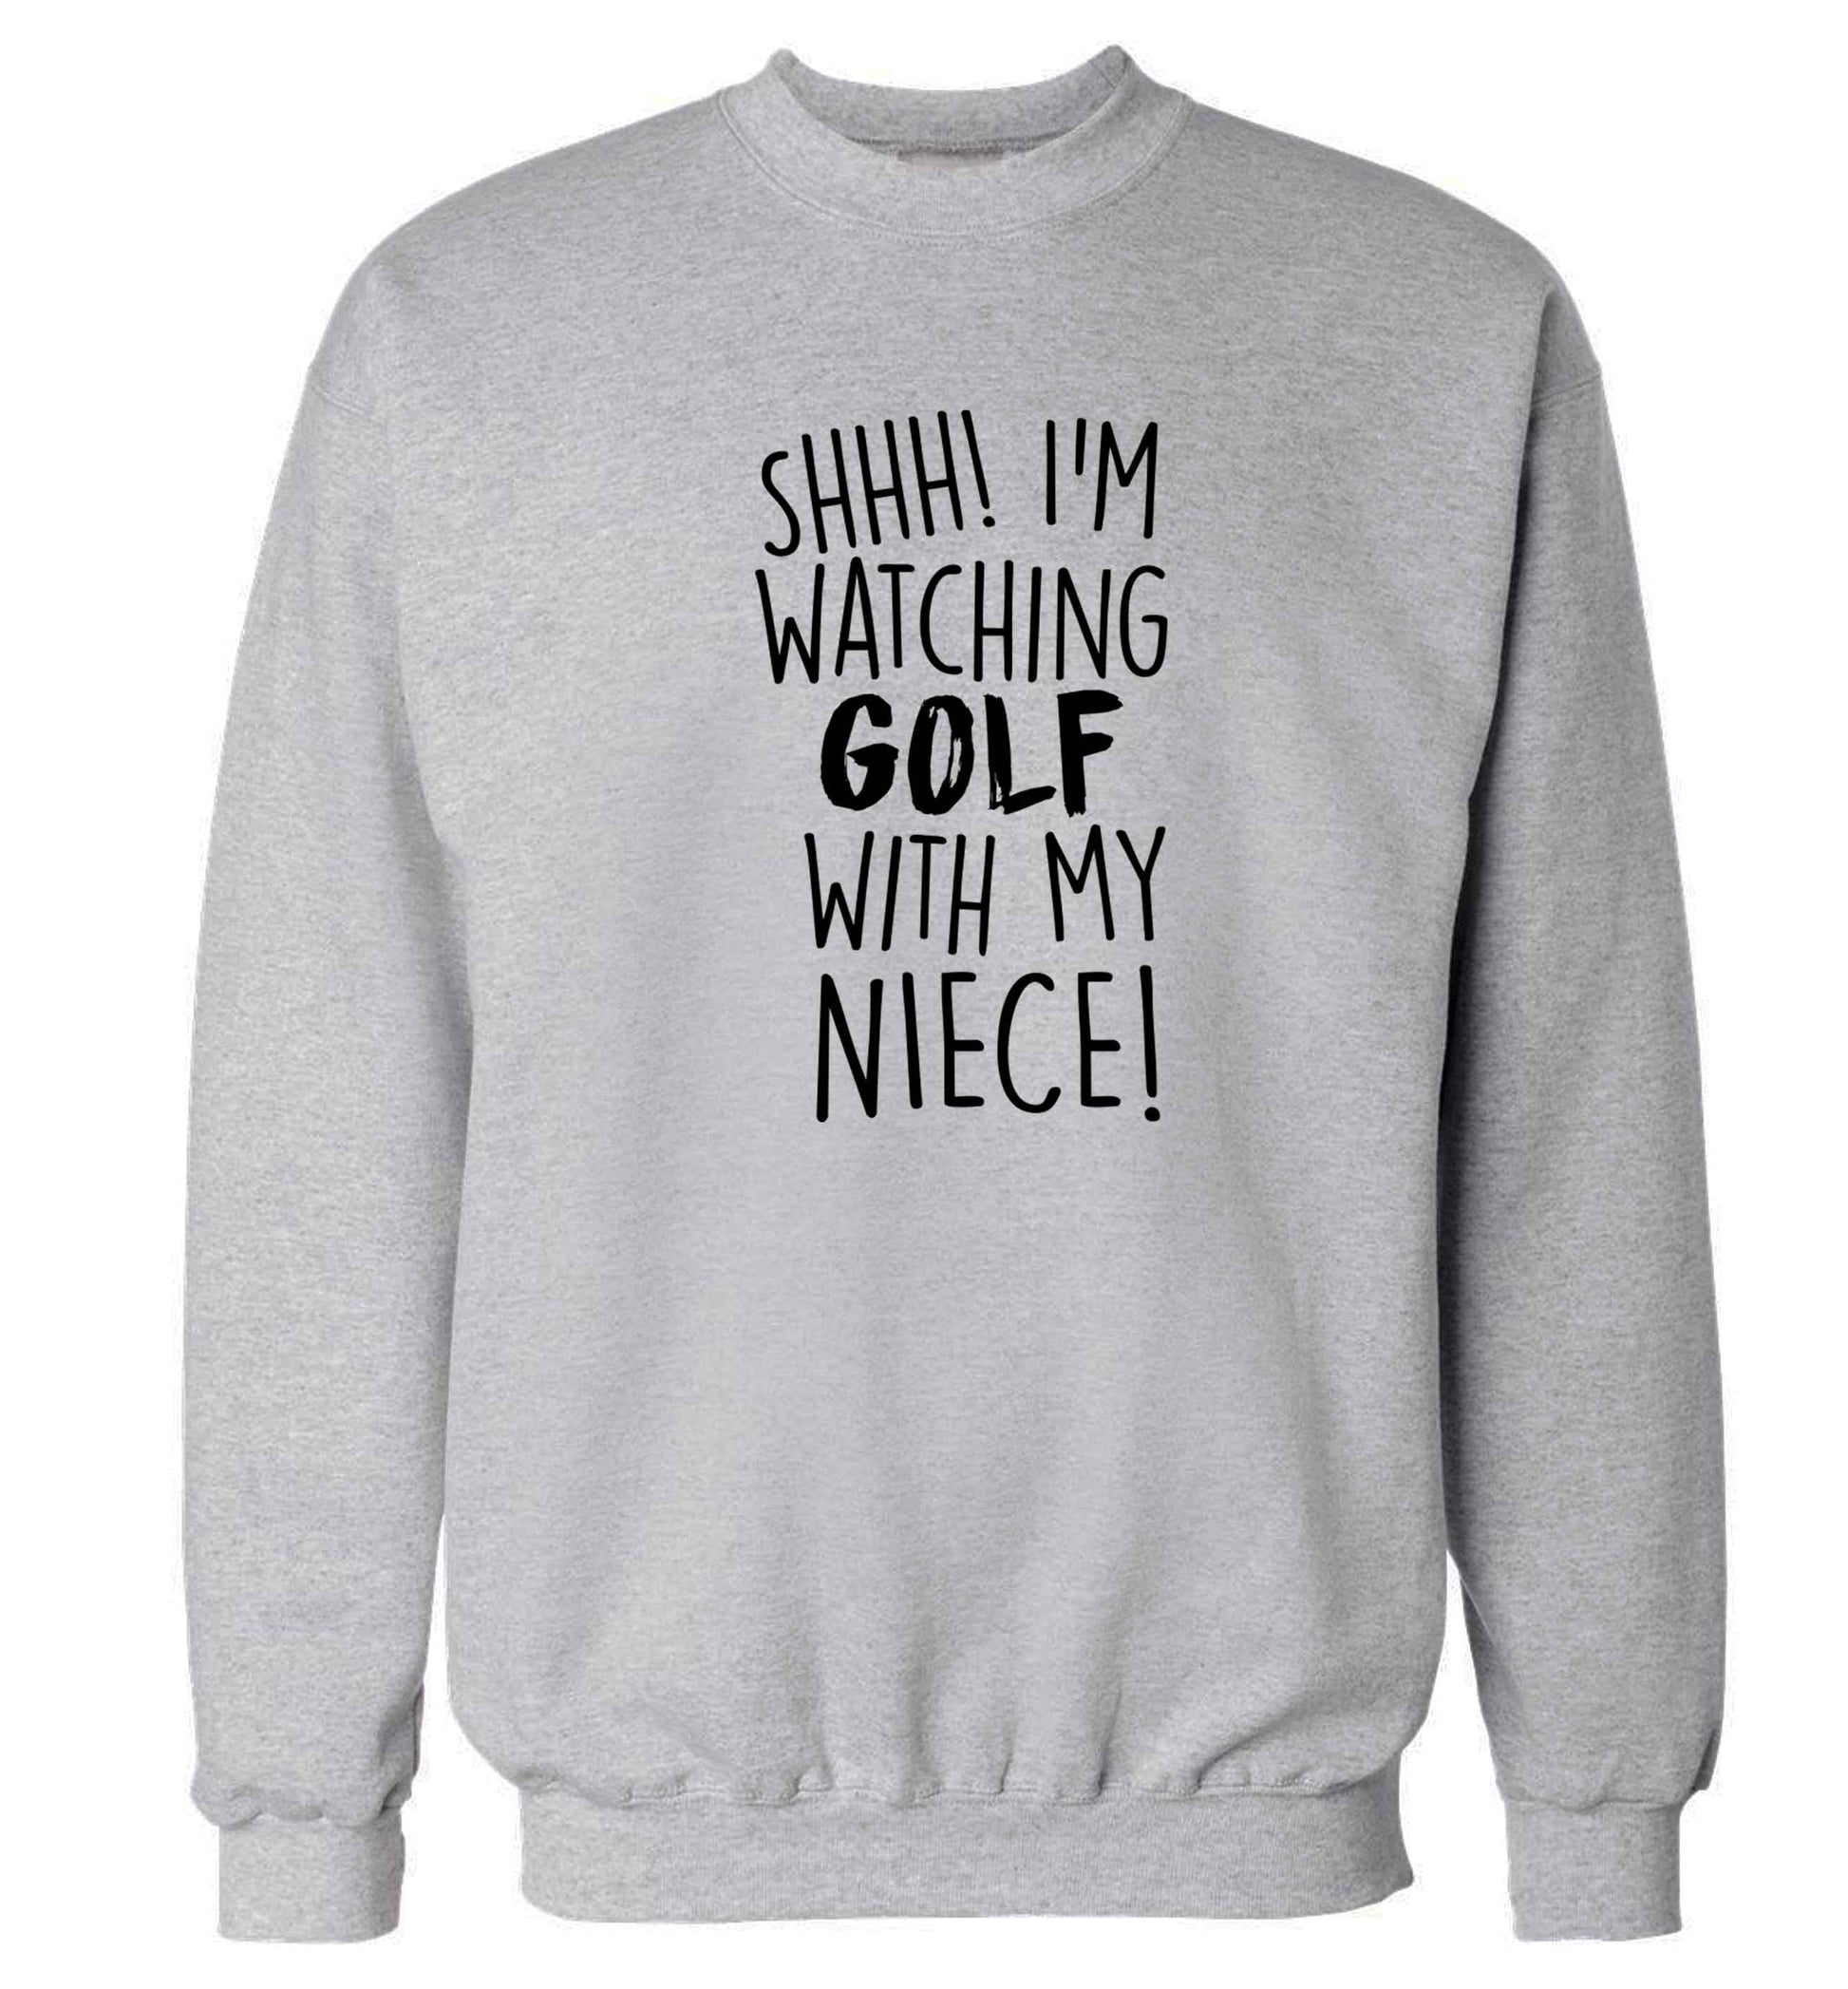 Shh I'm watching golf with my niece Adult's unisex grey Sweater 2XL